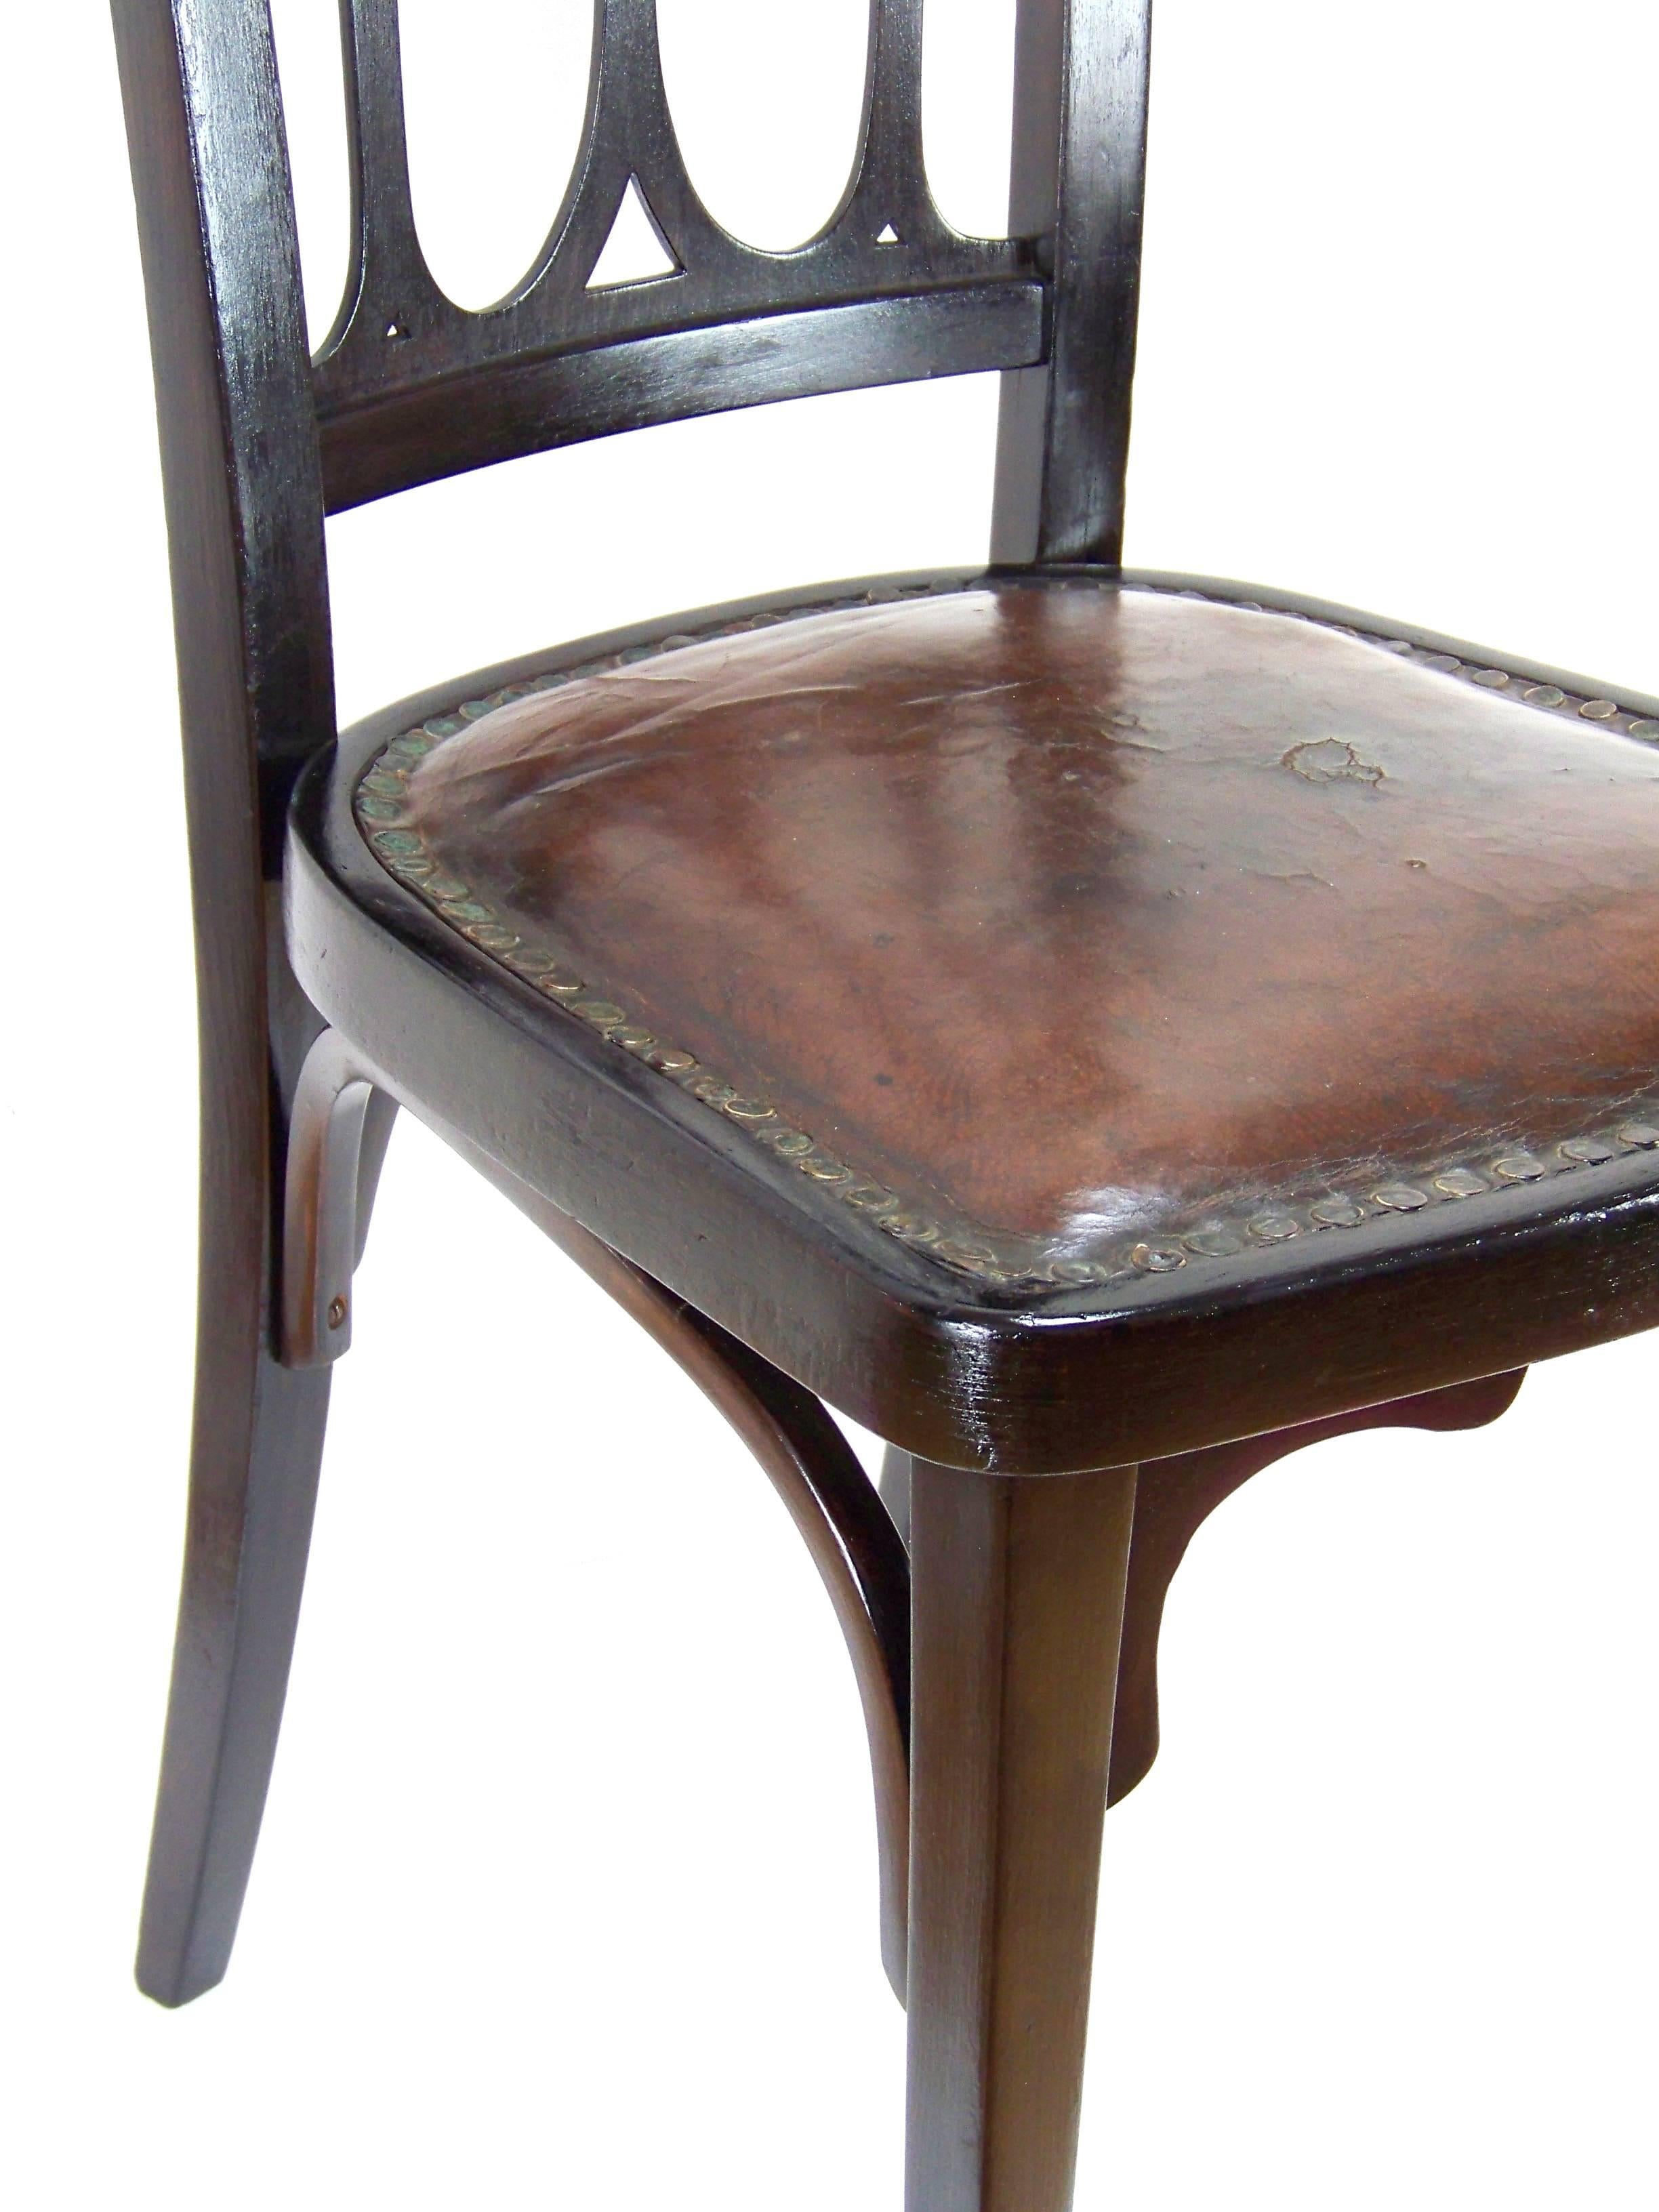 Manufactured in Austria by the Jacob & Josef Kohn company. In the production program was included circa 1906. Marked with stamp and paper label under the seat. Original polish was cleaned and re-polished with shellac finish. Color: Dark brown.